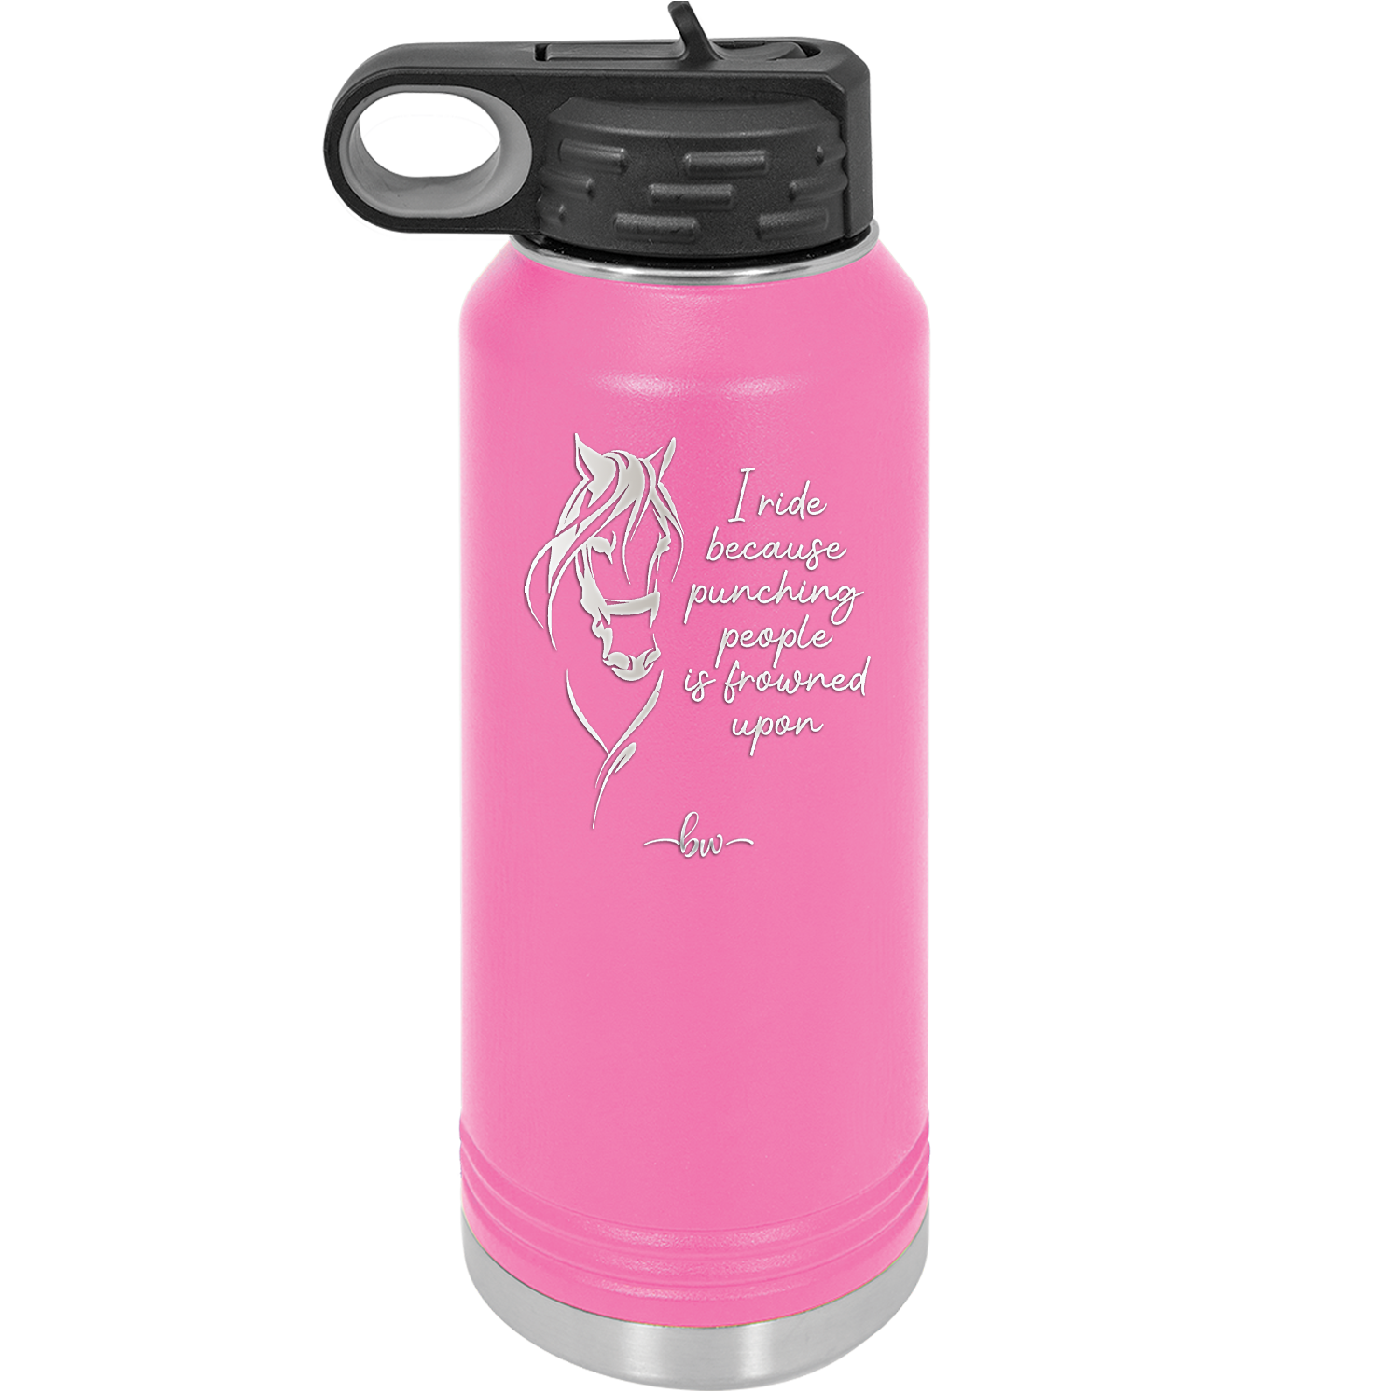 I Ride Because Punching People is Frowned Upon - Laser Engraved Stainless Steel Drinkware - 1382 -